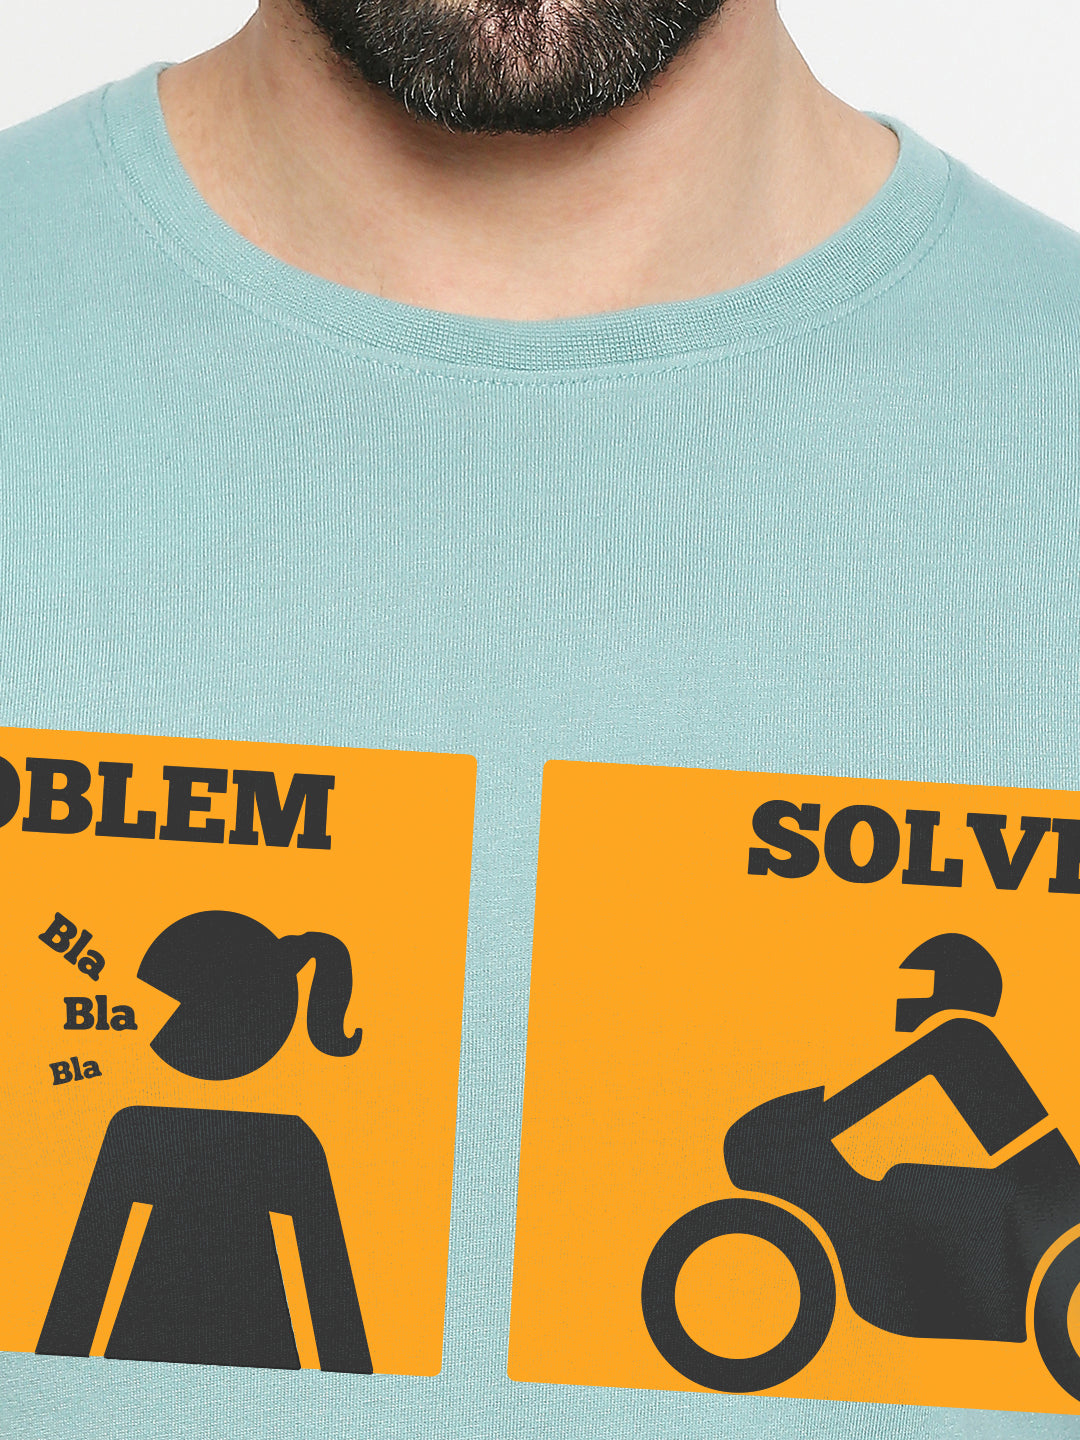 Rider's Problem Solved T-Shirt